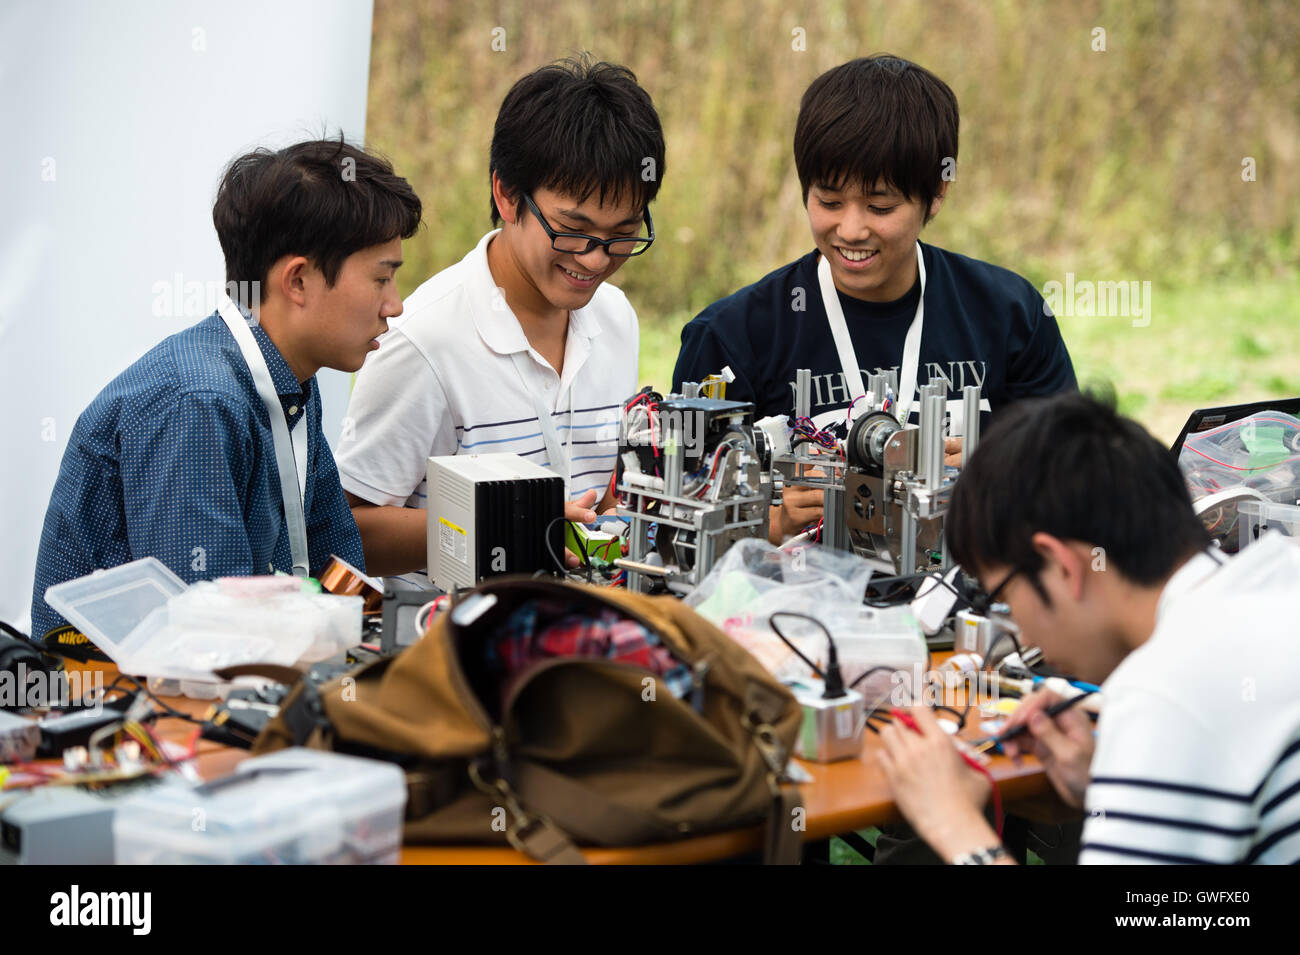 Garching, Germany. 13th Sep, 2016. Kenya Otsuka (l-r), Daichi Murakami and Jun Maeda of team 'Tryforce' from Japan at work during the European Space Elevator Challenge on the campus of the Munich Technical University in Garching, Germany, 13 September 2016. For the competition, the teams have developed small 'space elevators', which have to travel 100 metres along a rope up to a balloon. PHOTO: MATTHIAS BALK/DPA/Alamy Live News Stock Photo